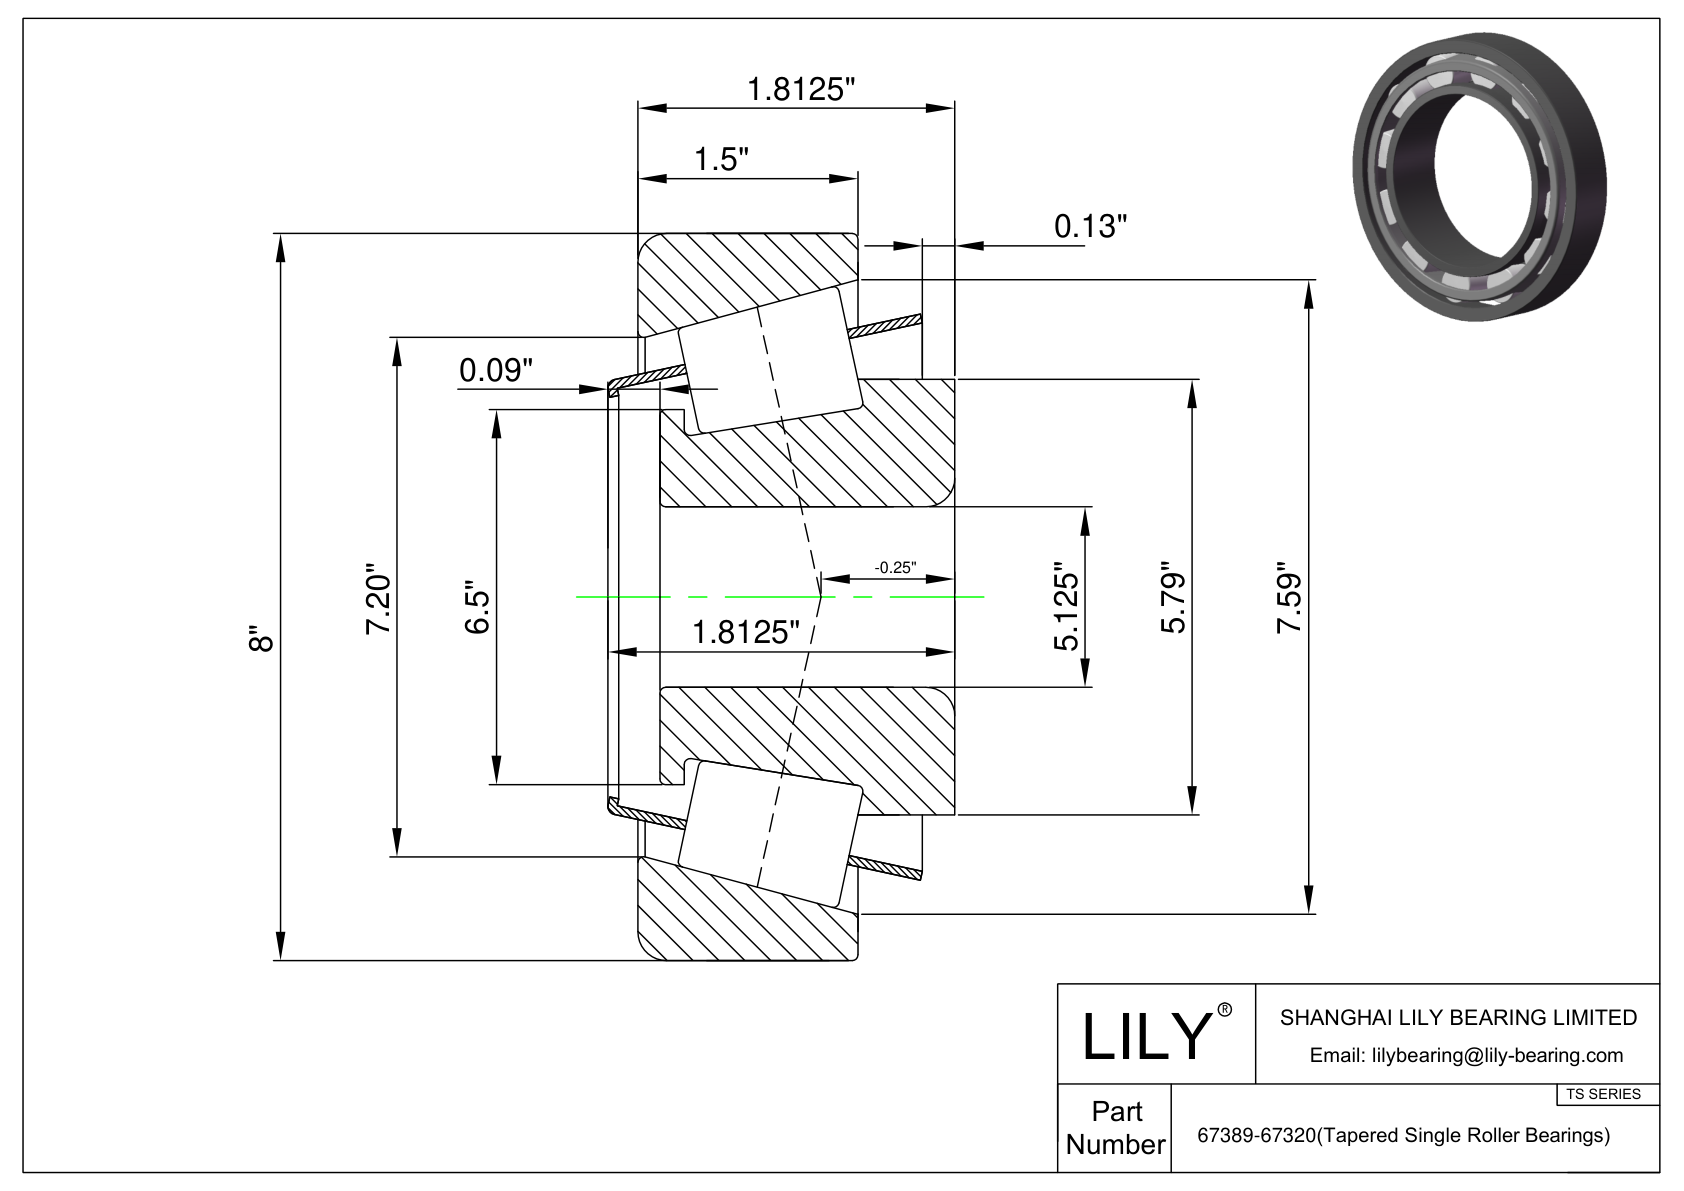 67389-67320 TS (Tapered Single Roller Bearings) (Imperial) cad drawing